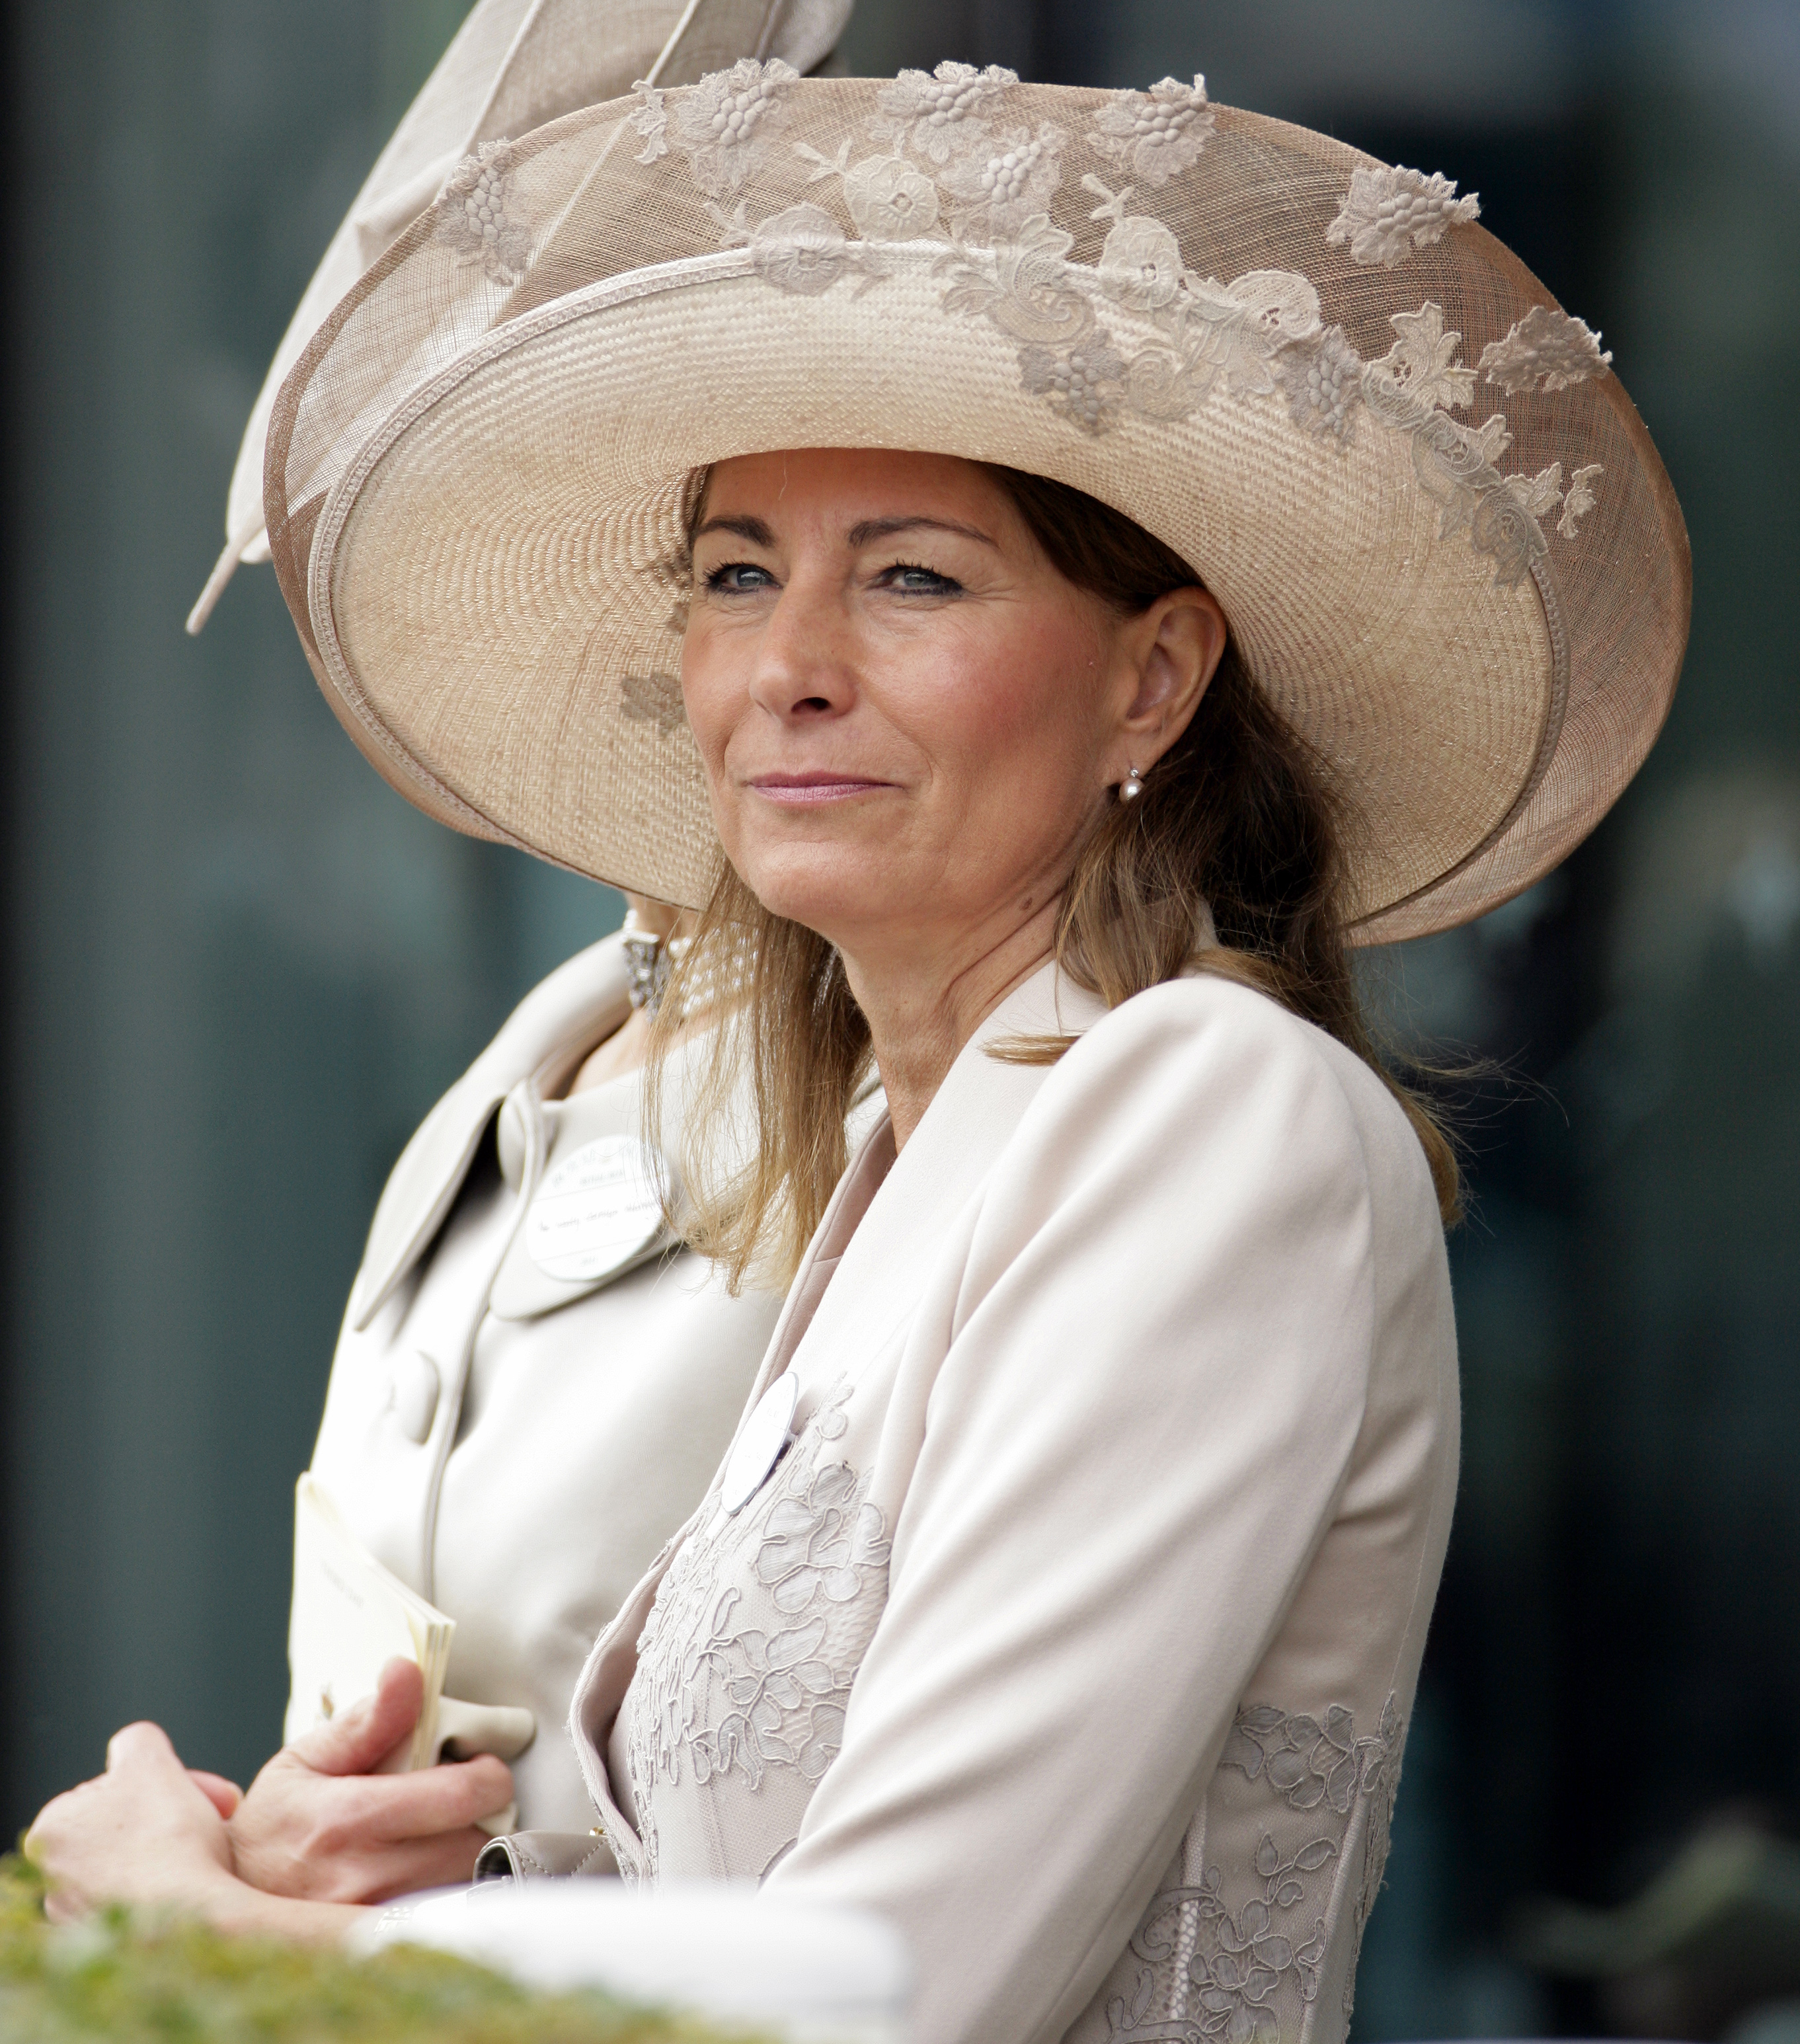 Carole Middleton attends day 3, "Ladies Day" of Royal Ascot at Ascot Racecourse in United Kingdom. | Source: Getty Images